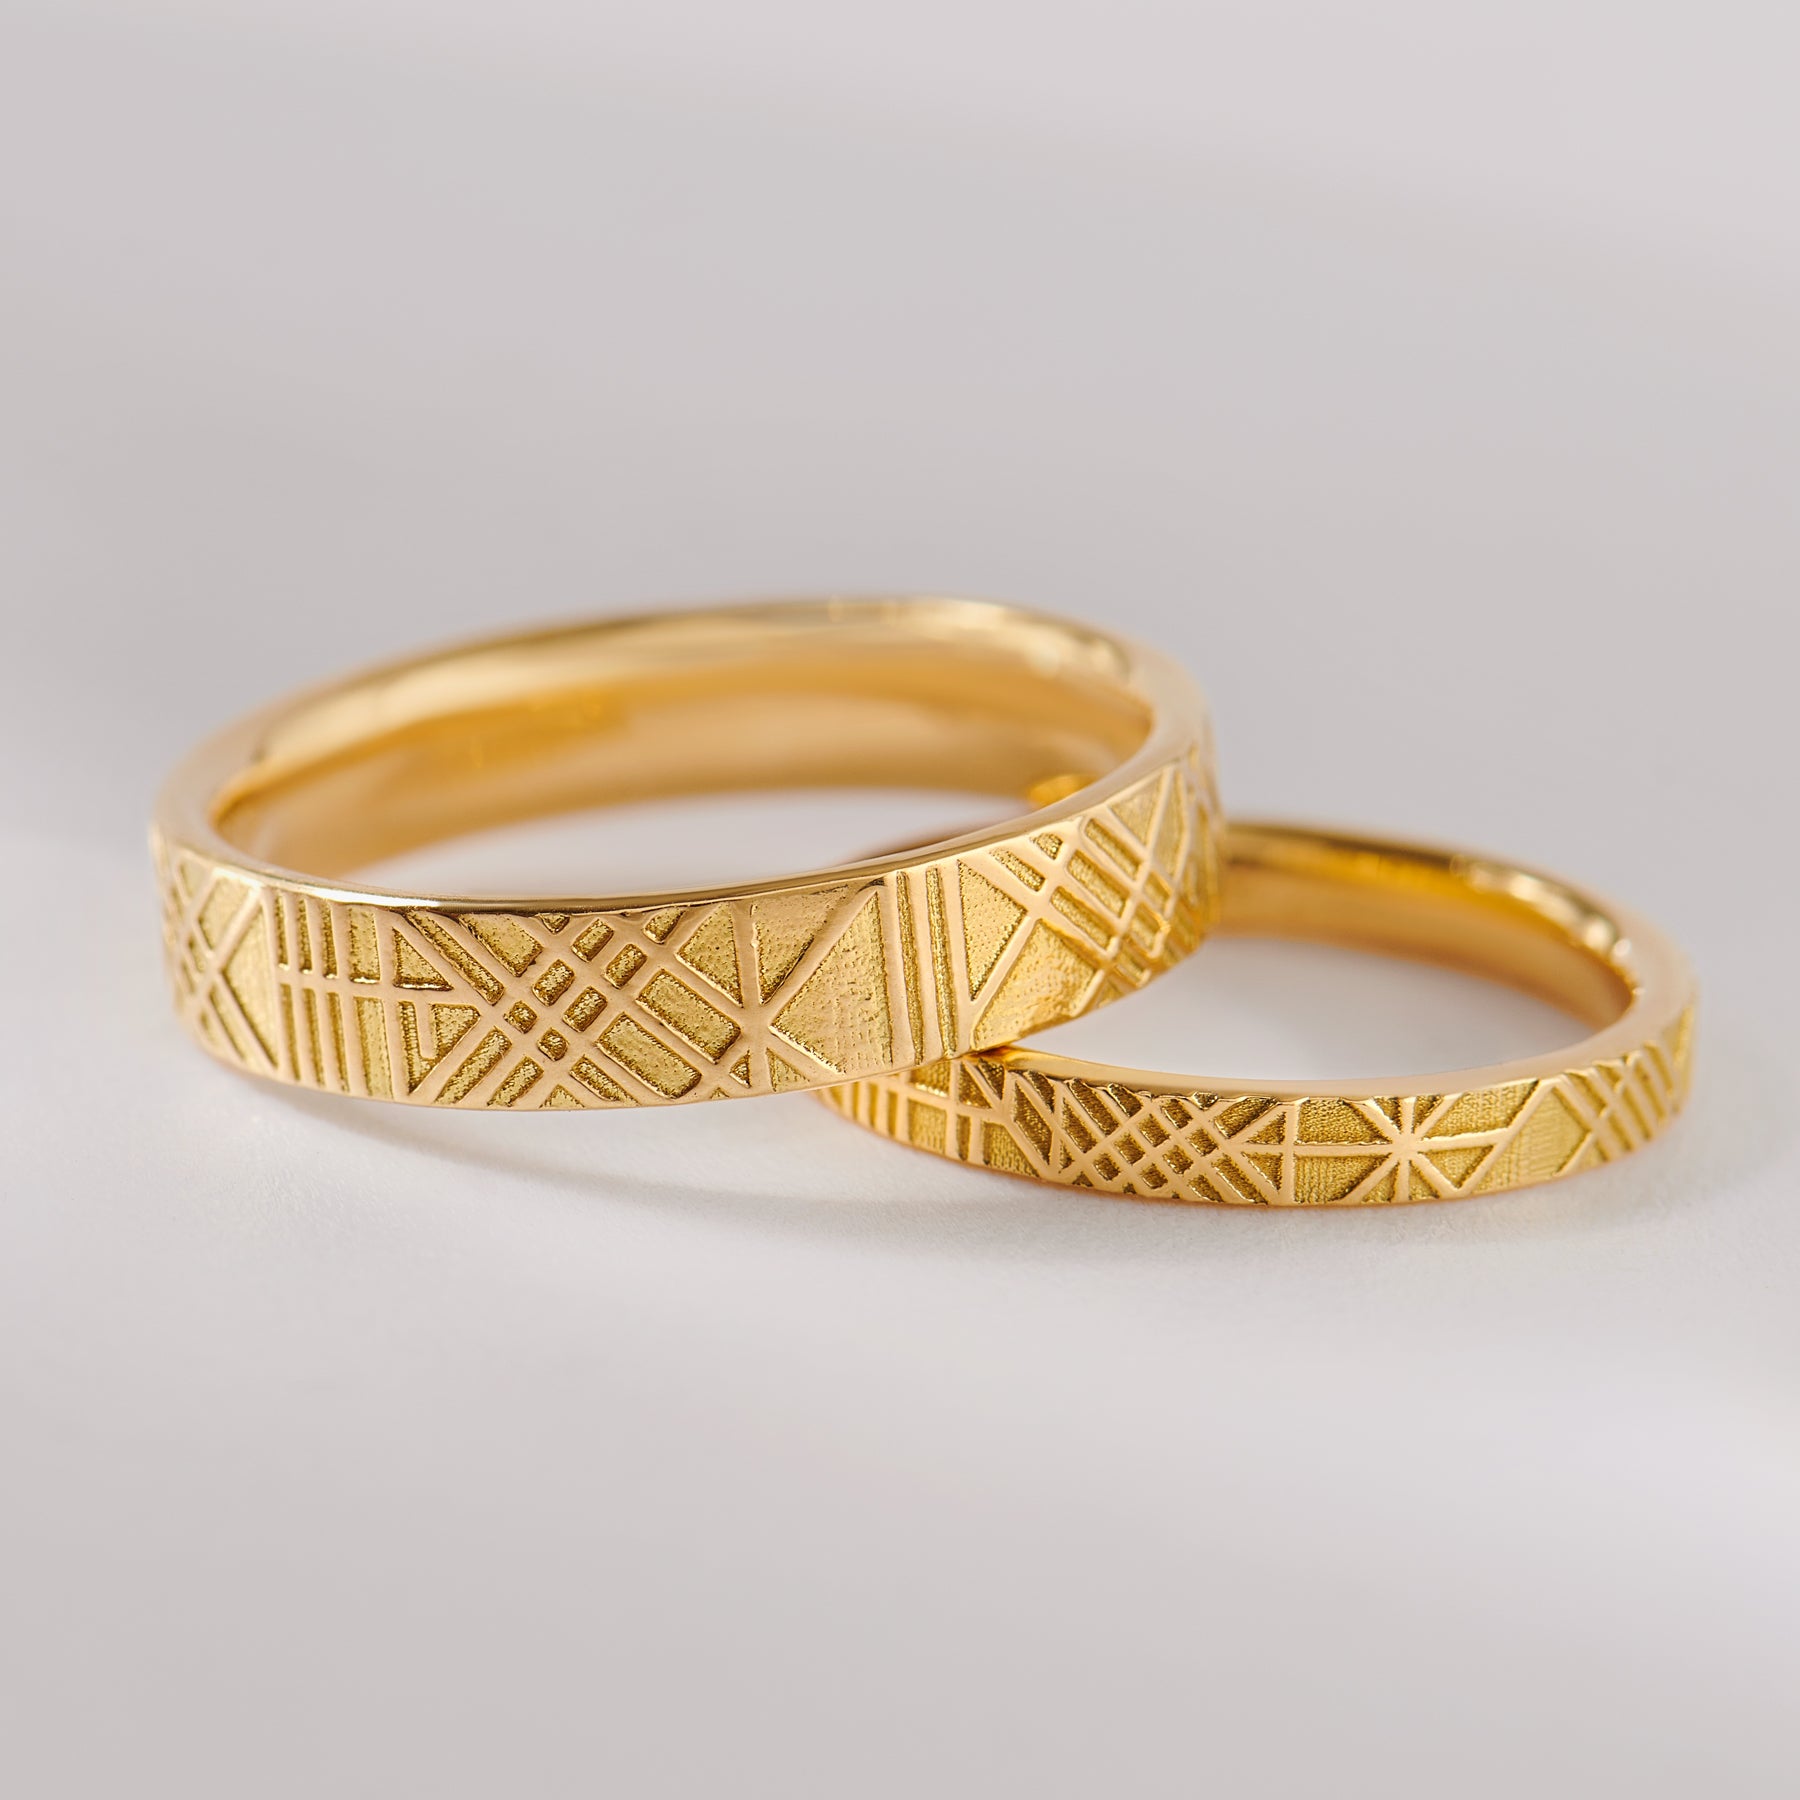 The Unique and Geometric - A Set of Golden Wedding Bands